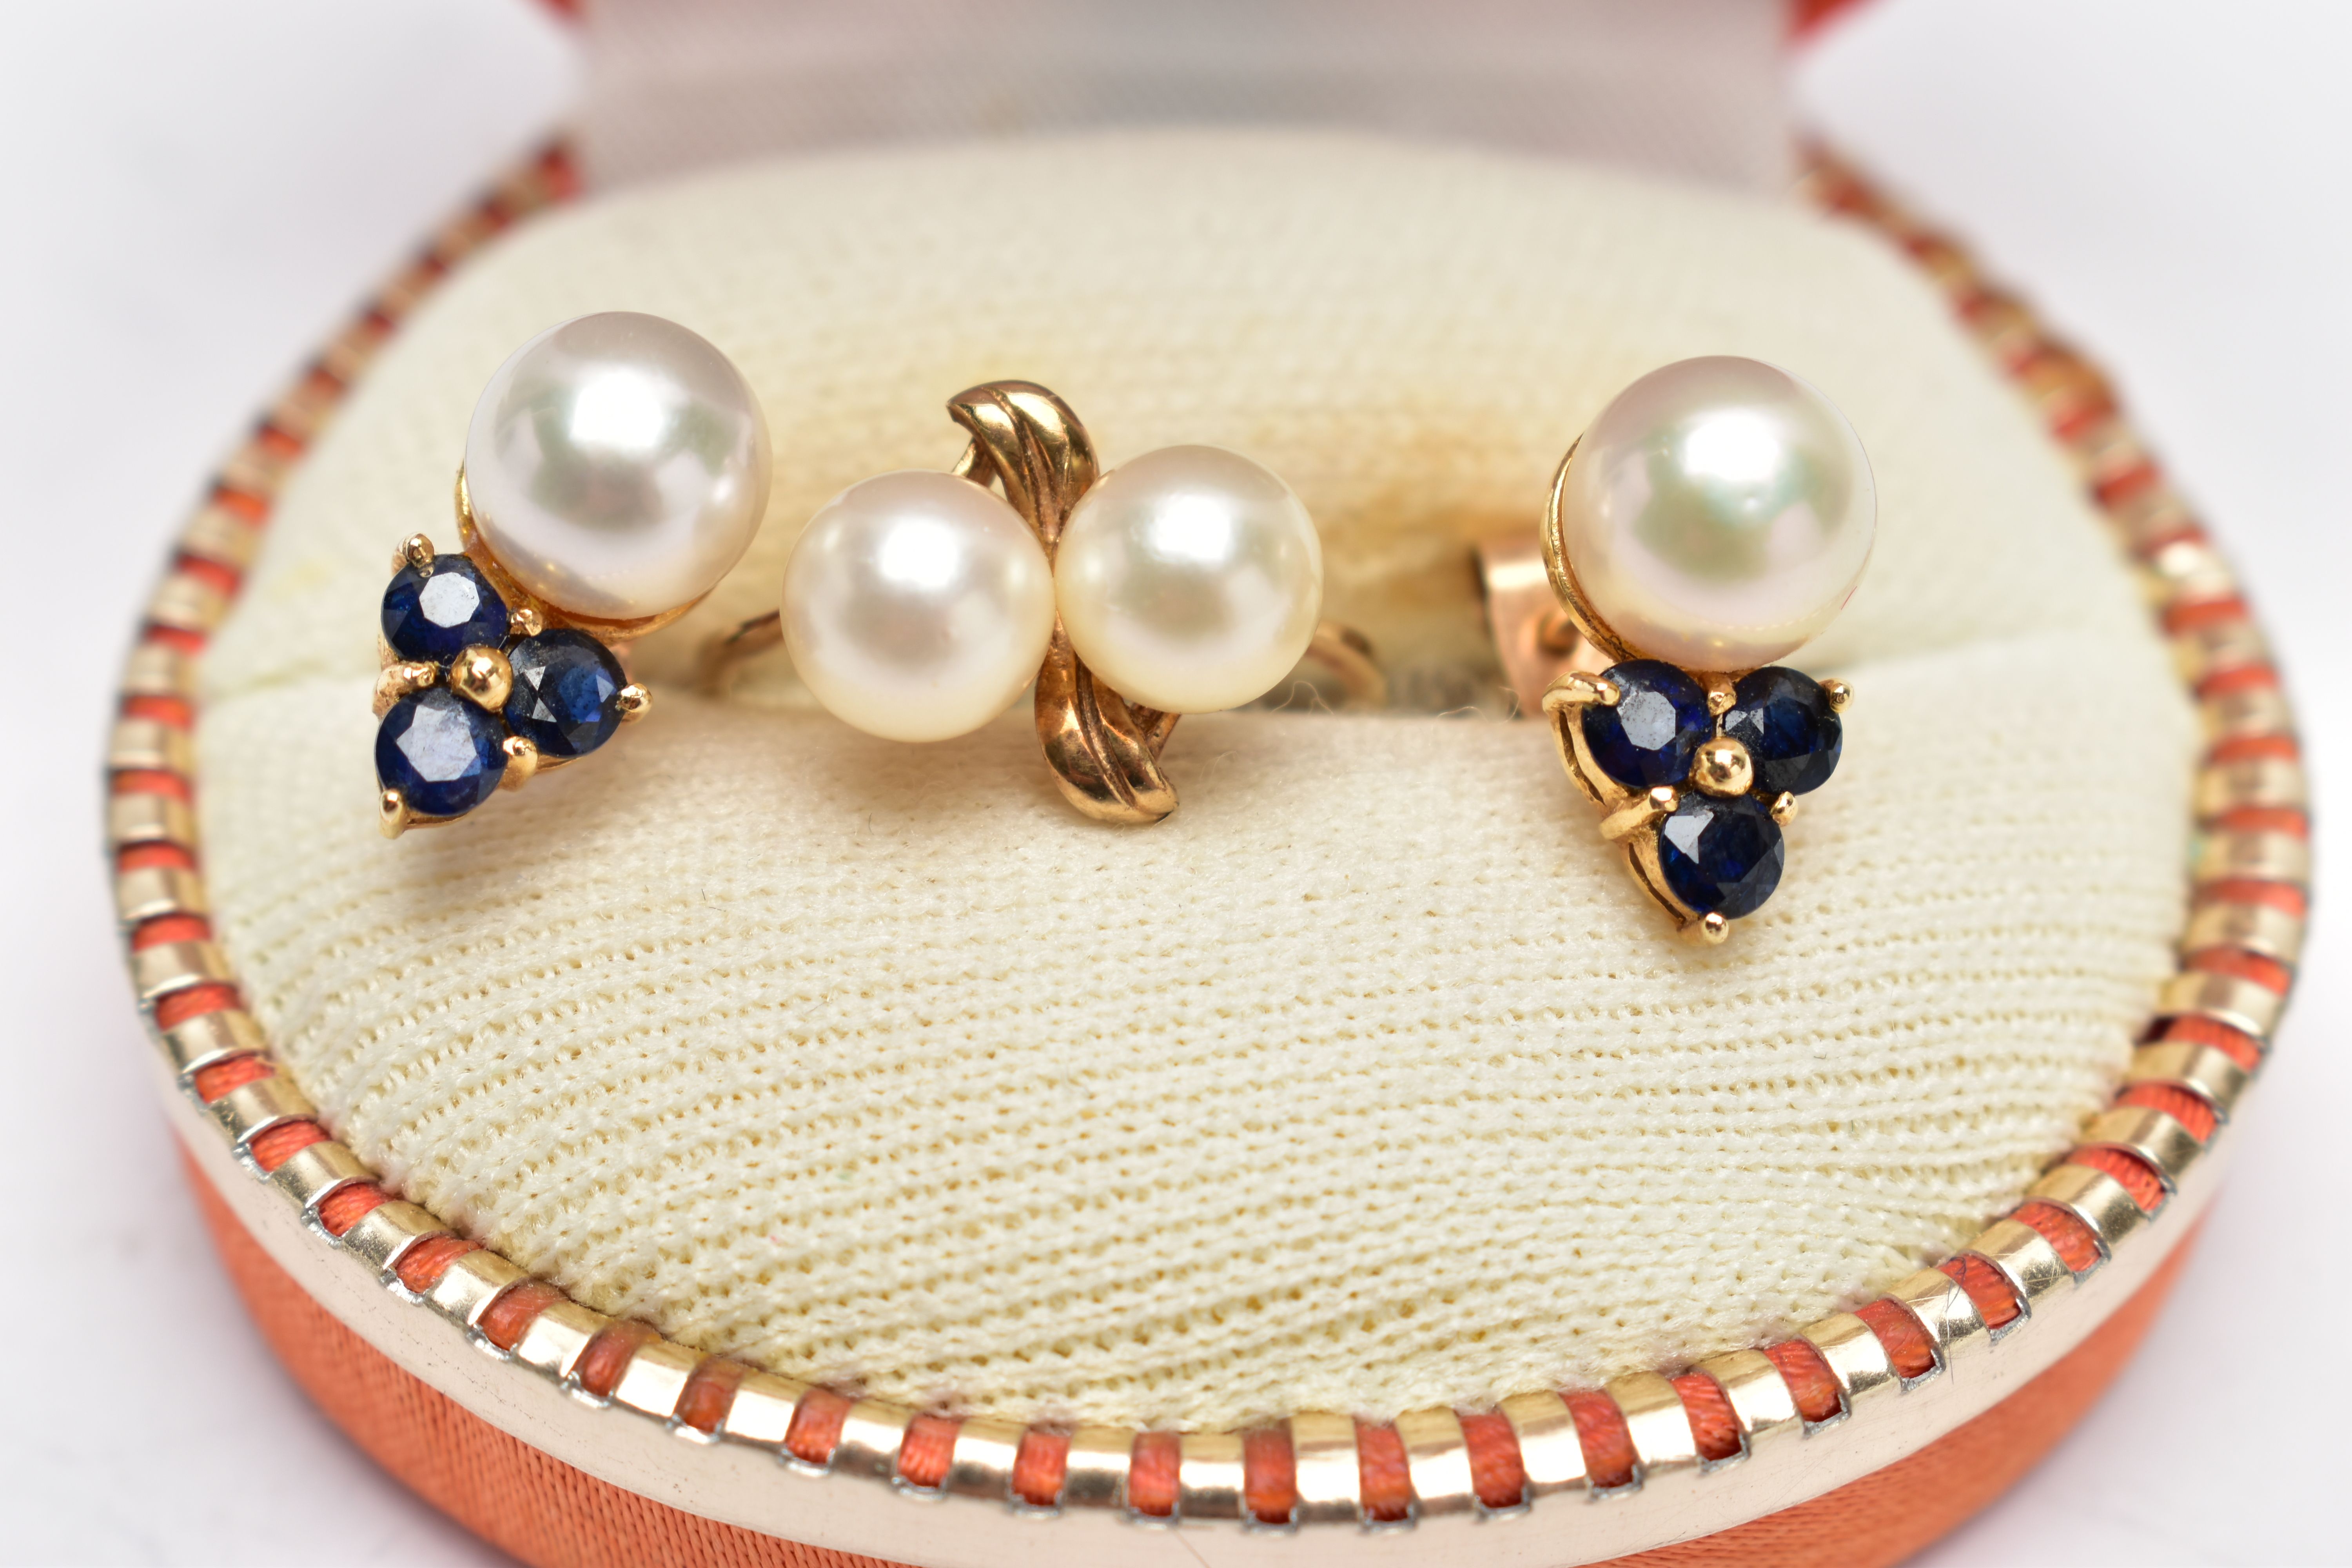 A 9CT GOLD PEARL RING AND PEARL EARRINGS, two cultured pearls set upon a thin yellow gold band,